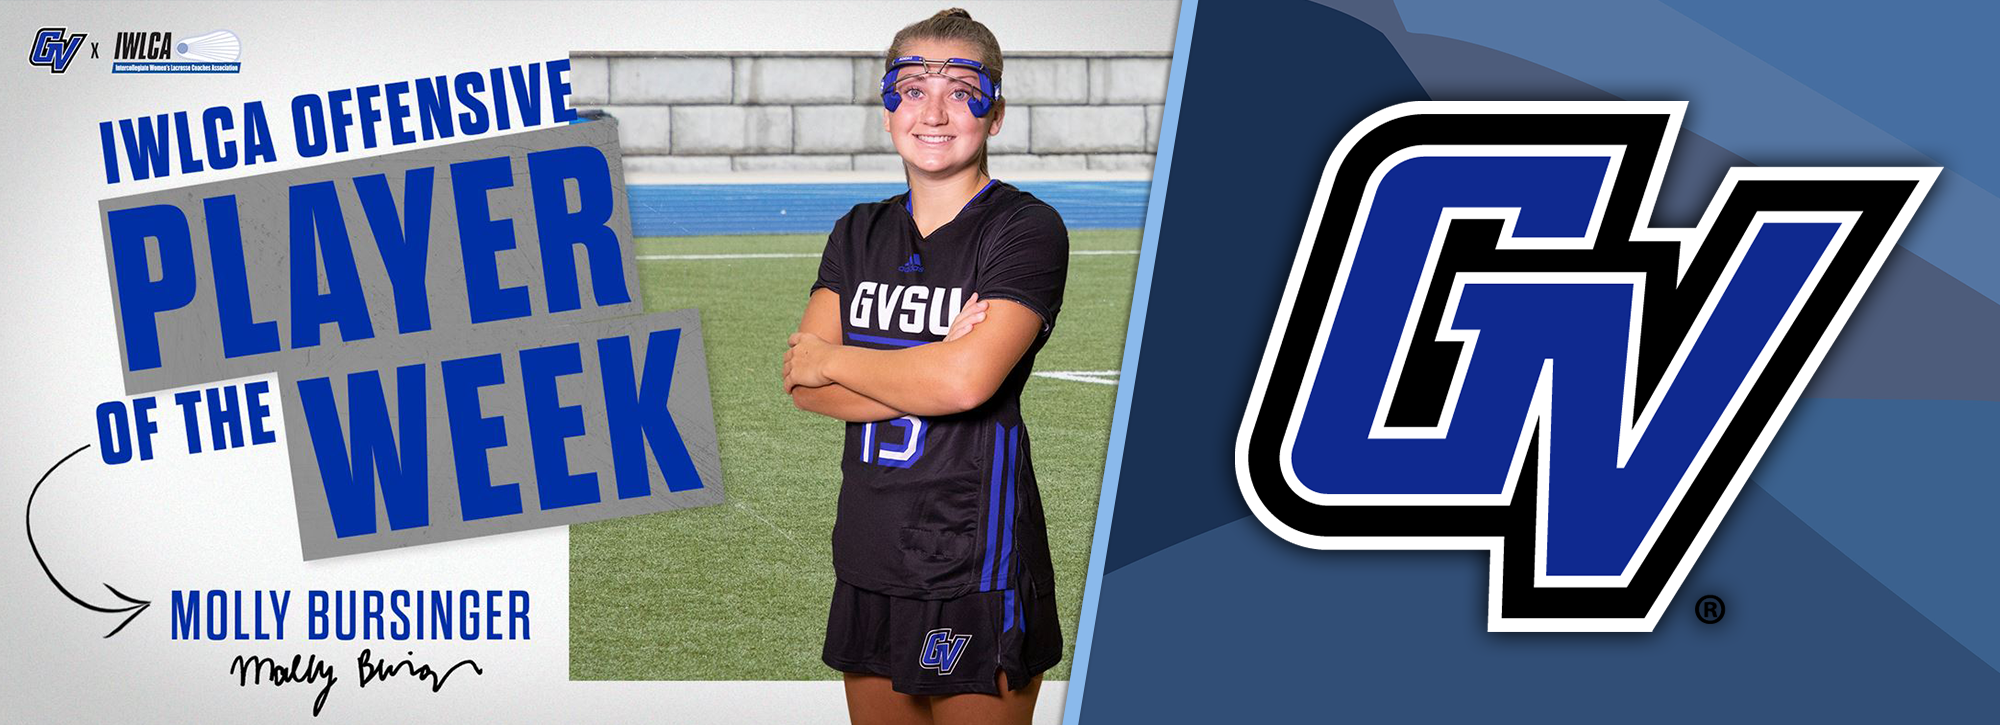 Grand Valley State's Bursinger earns IWLCA Offensive Player of the Week honor